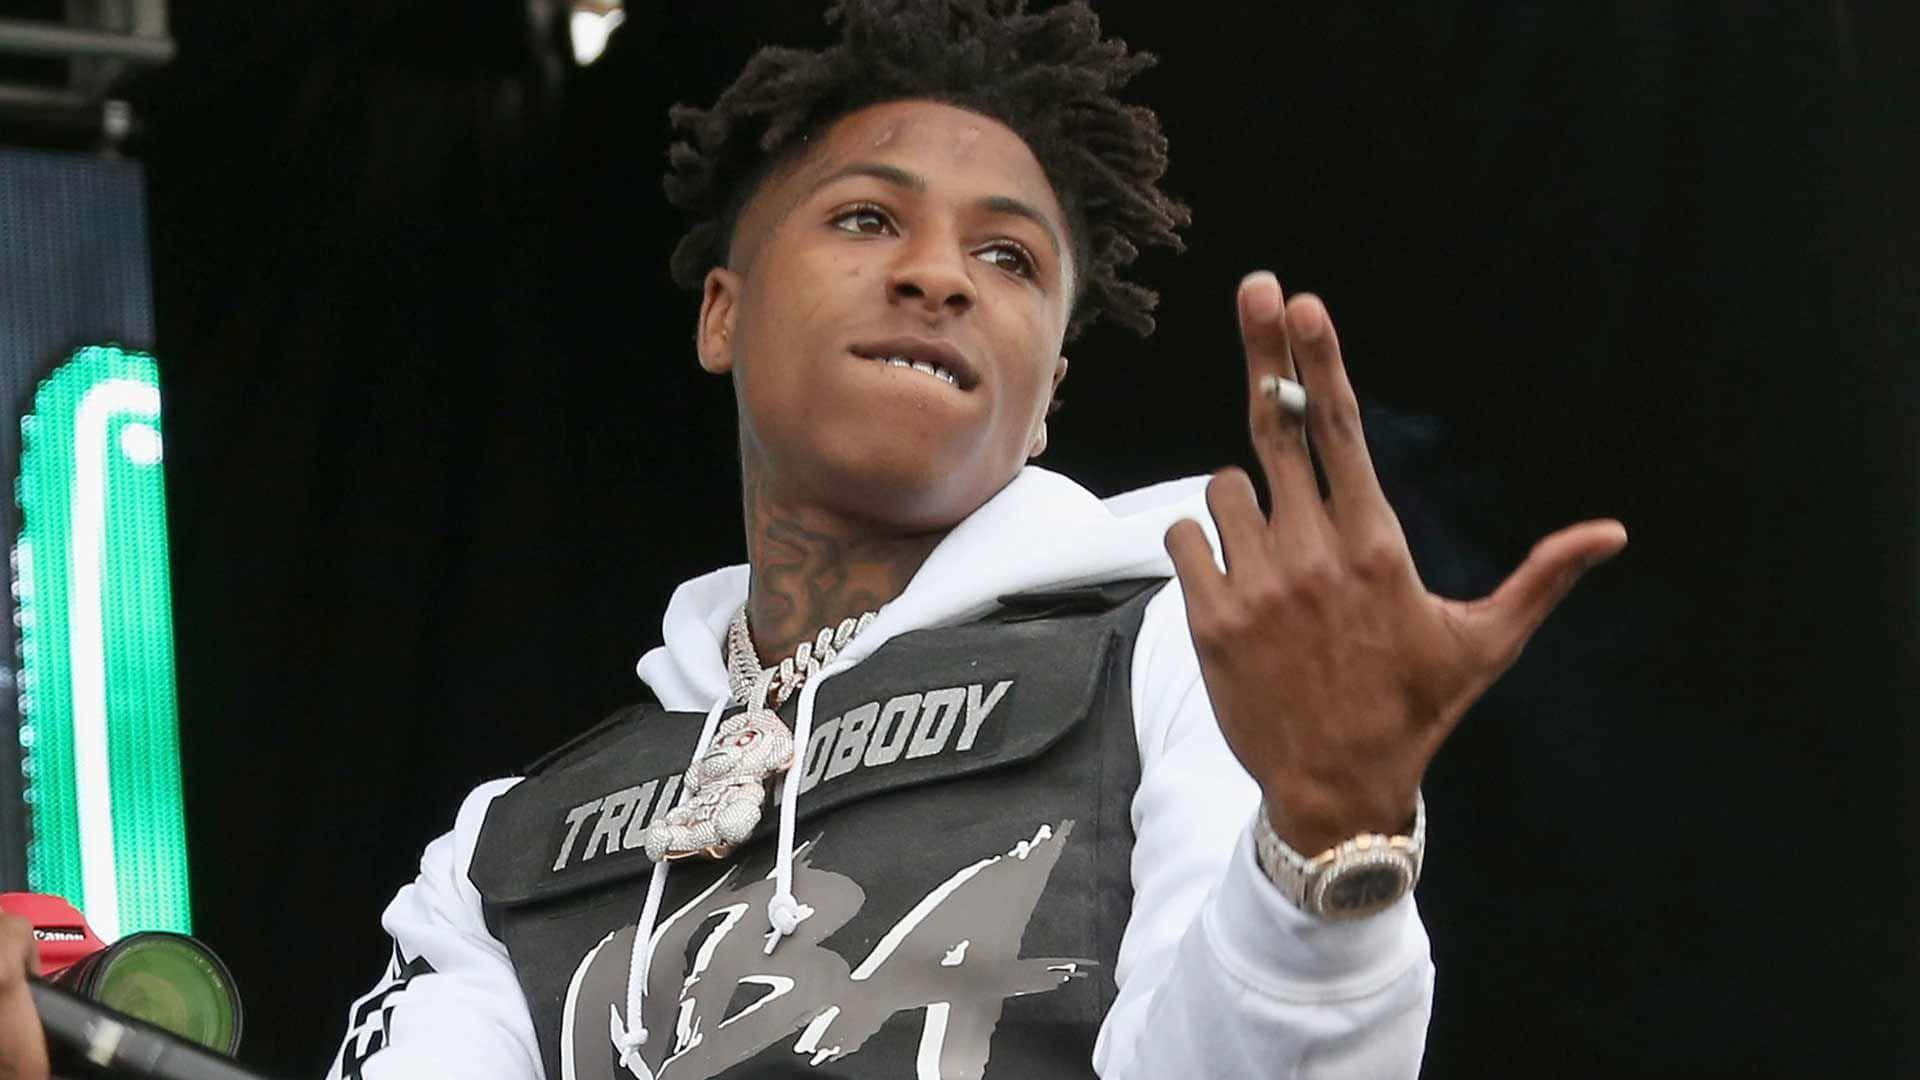 NBA Youngboy at a Performance